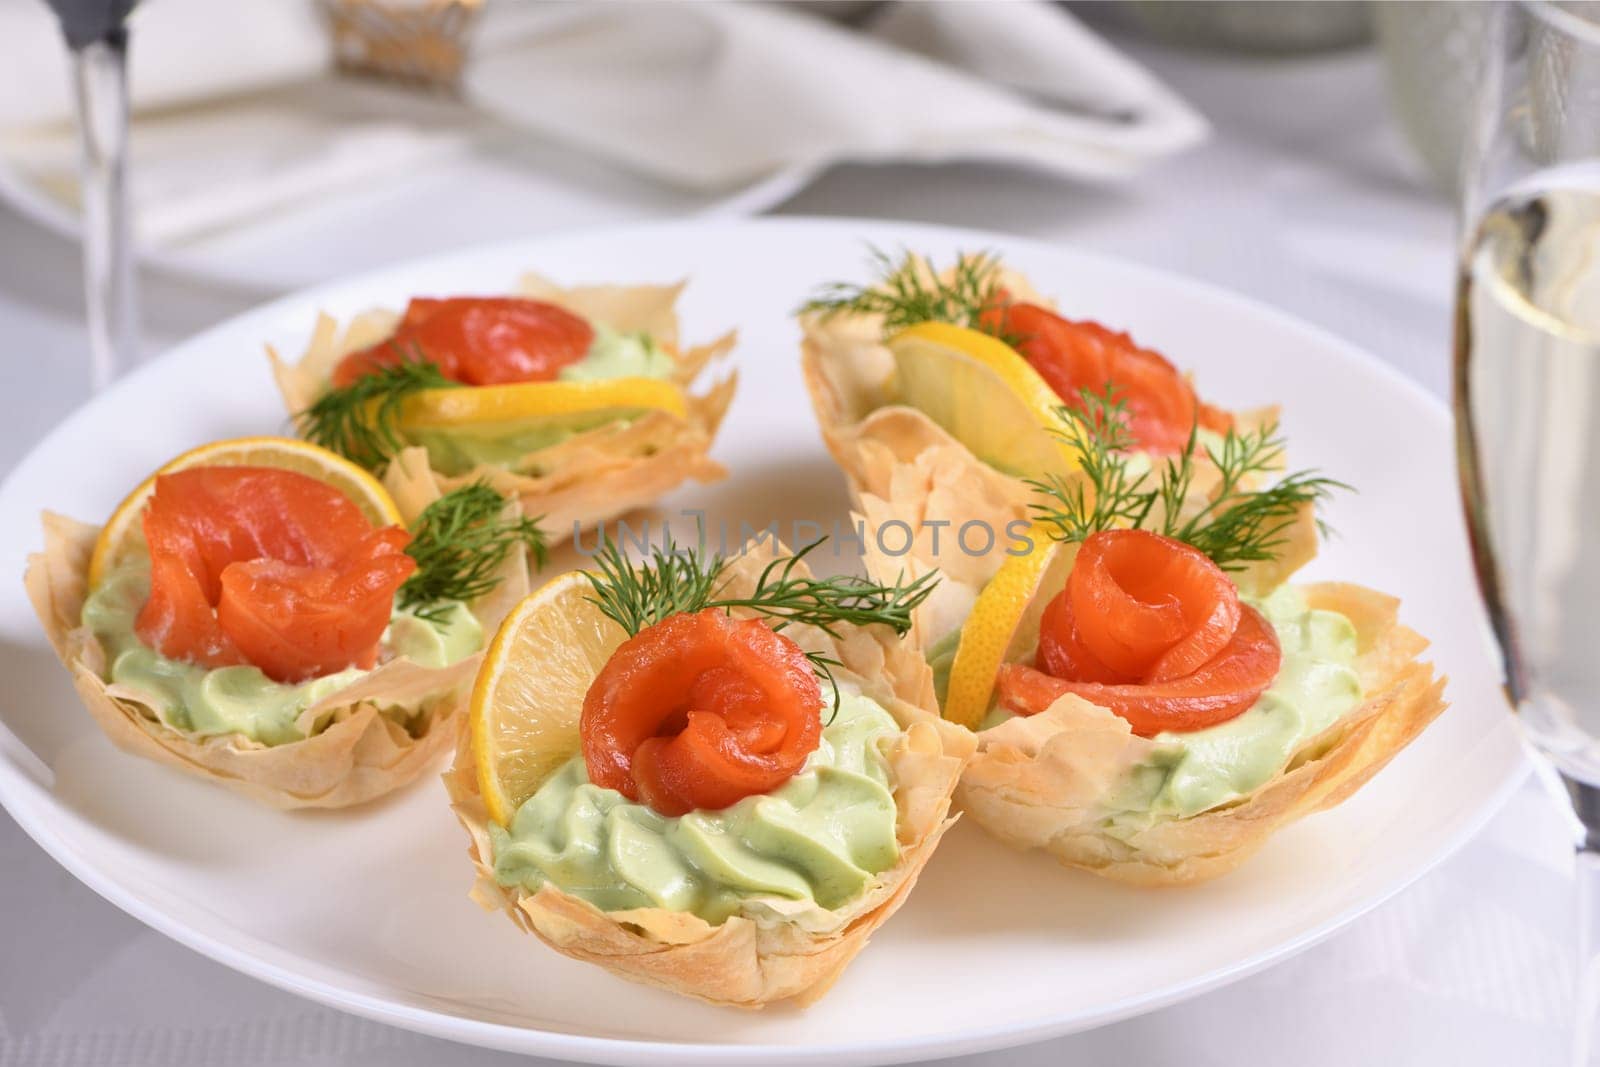 Filo dough baskets with avocado pate and salmon by Apolonia